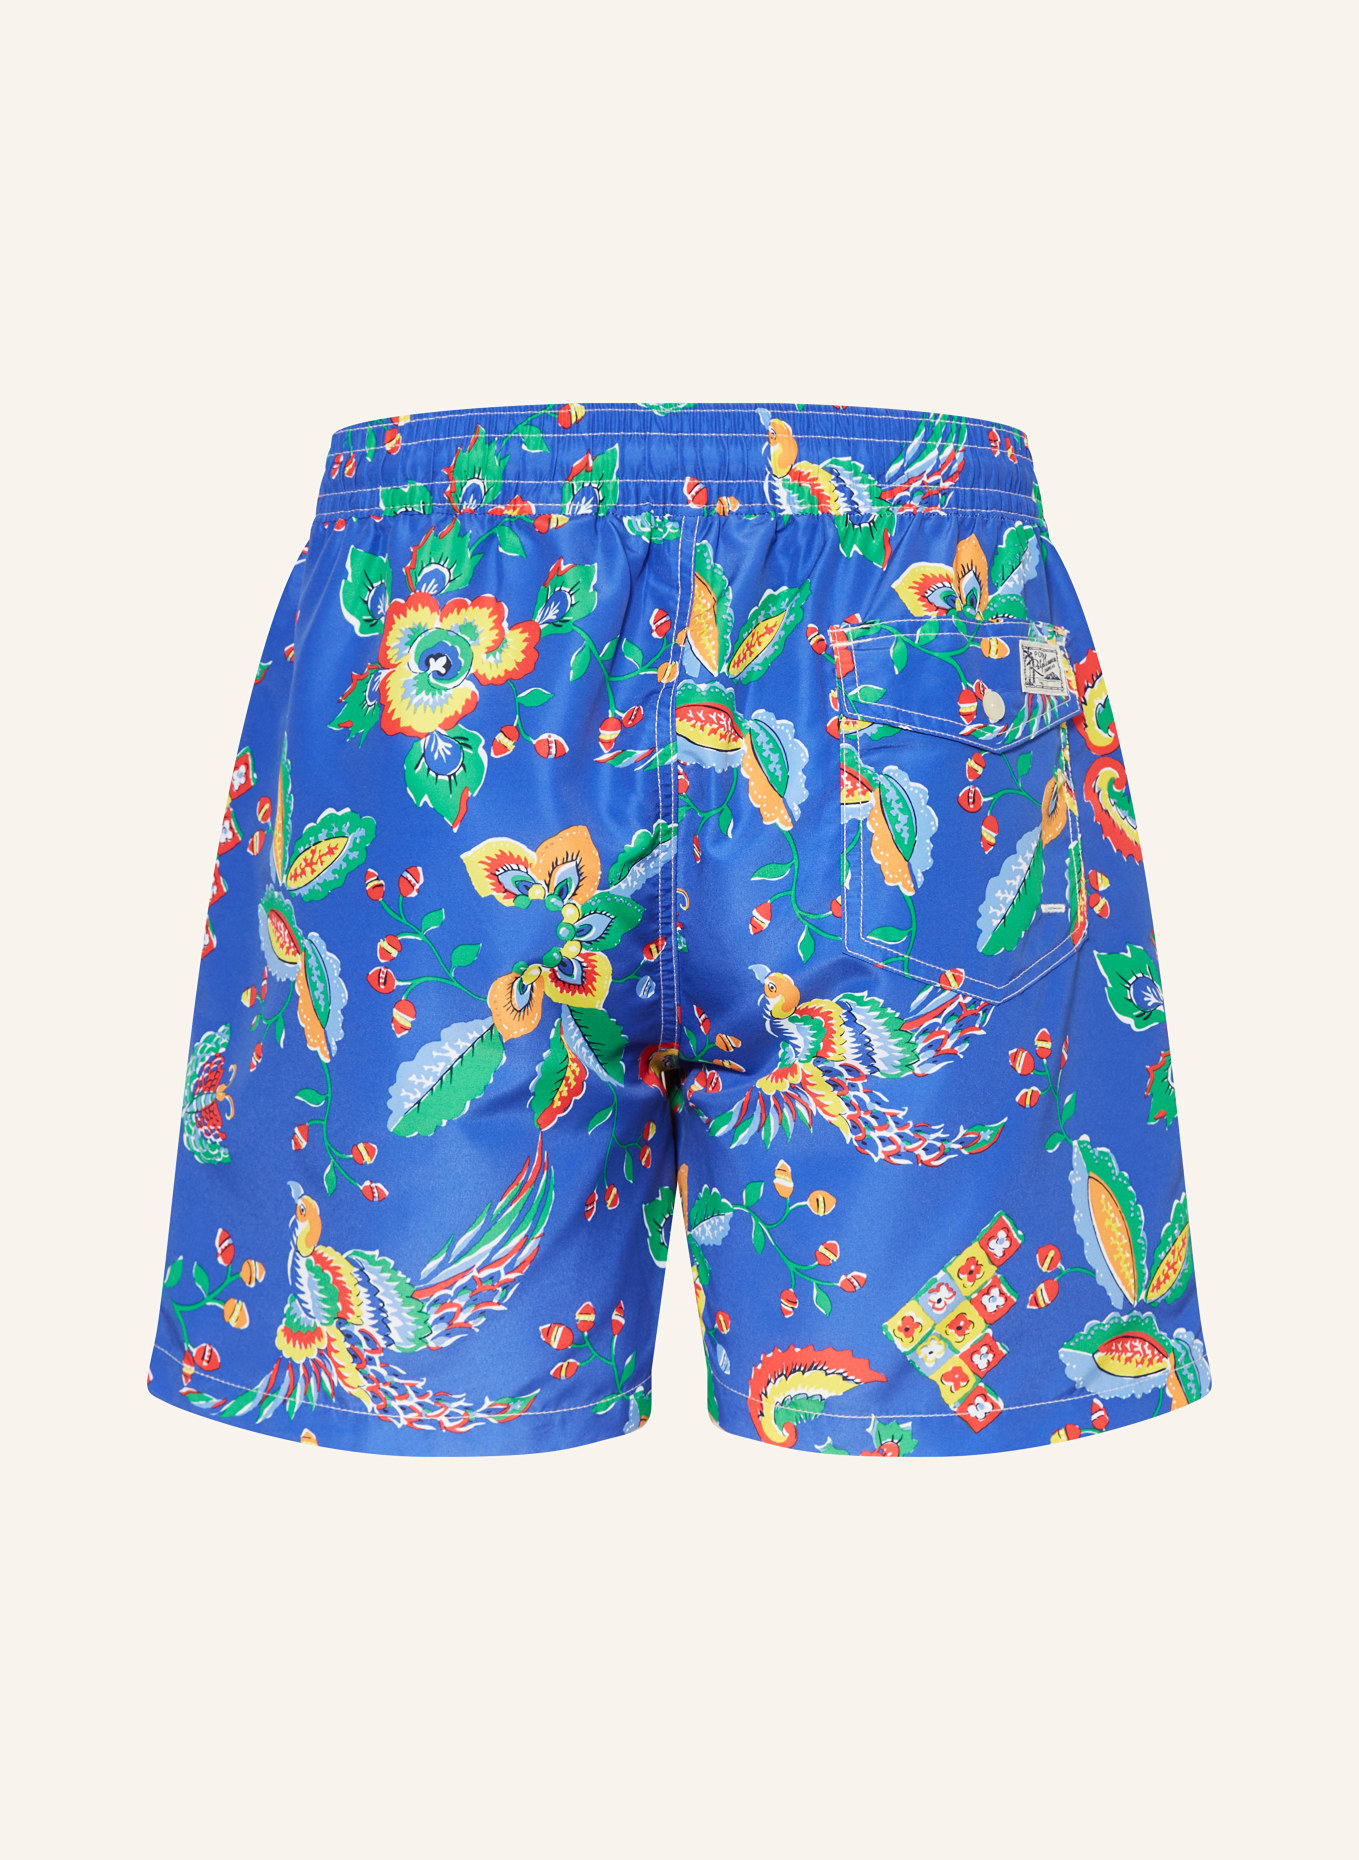 POLO RALPH LAUREN Swim shorts, Color: BLUE/ YELLOW/ RED (Image 2)